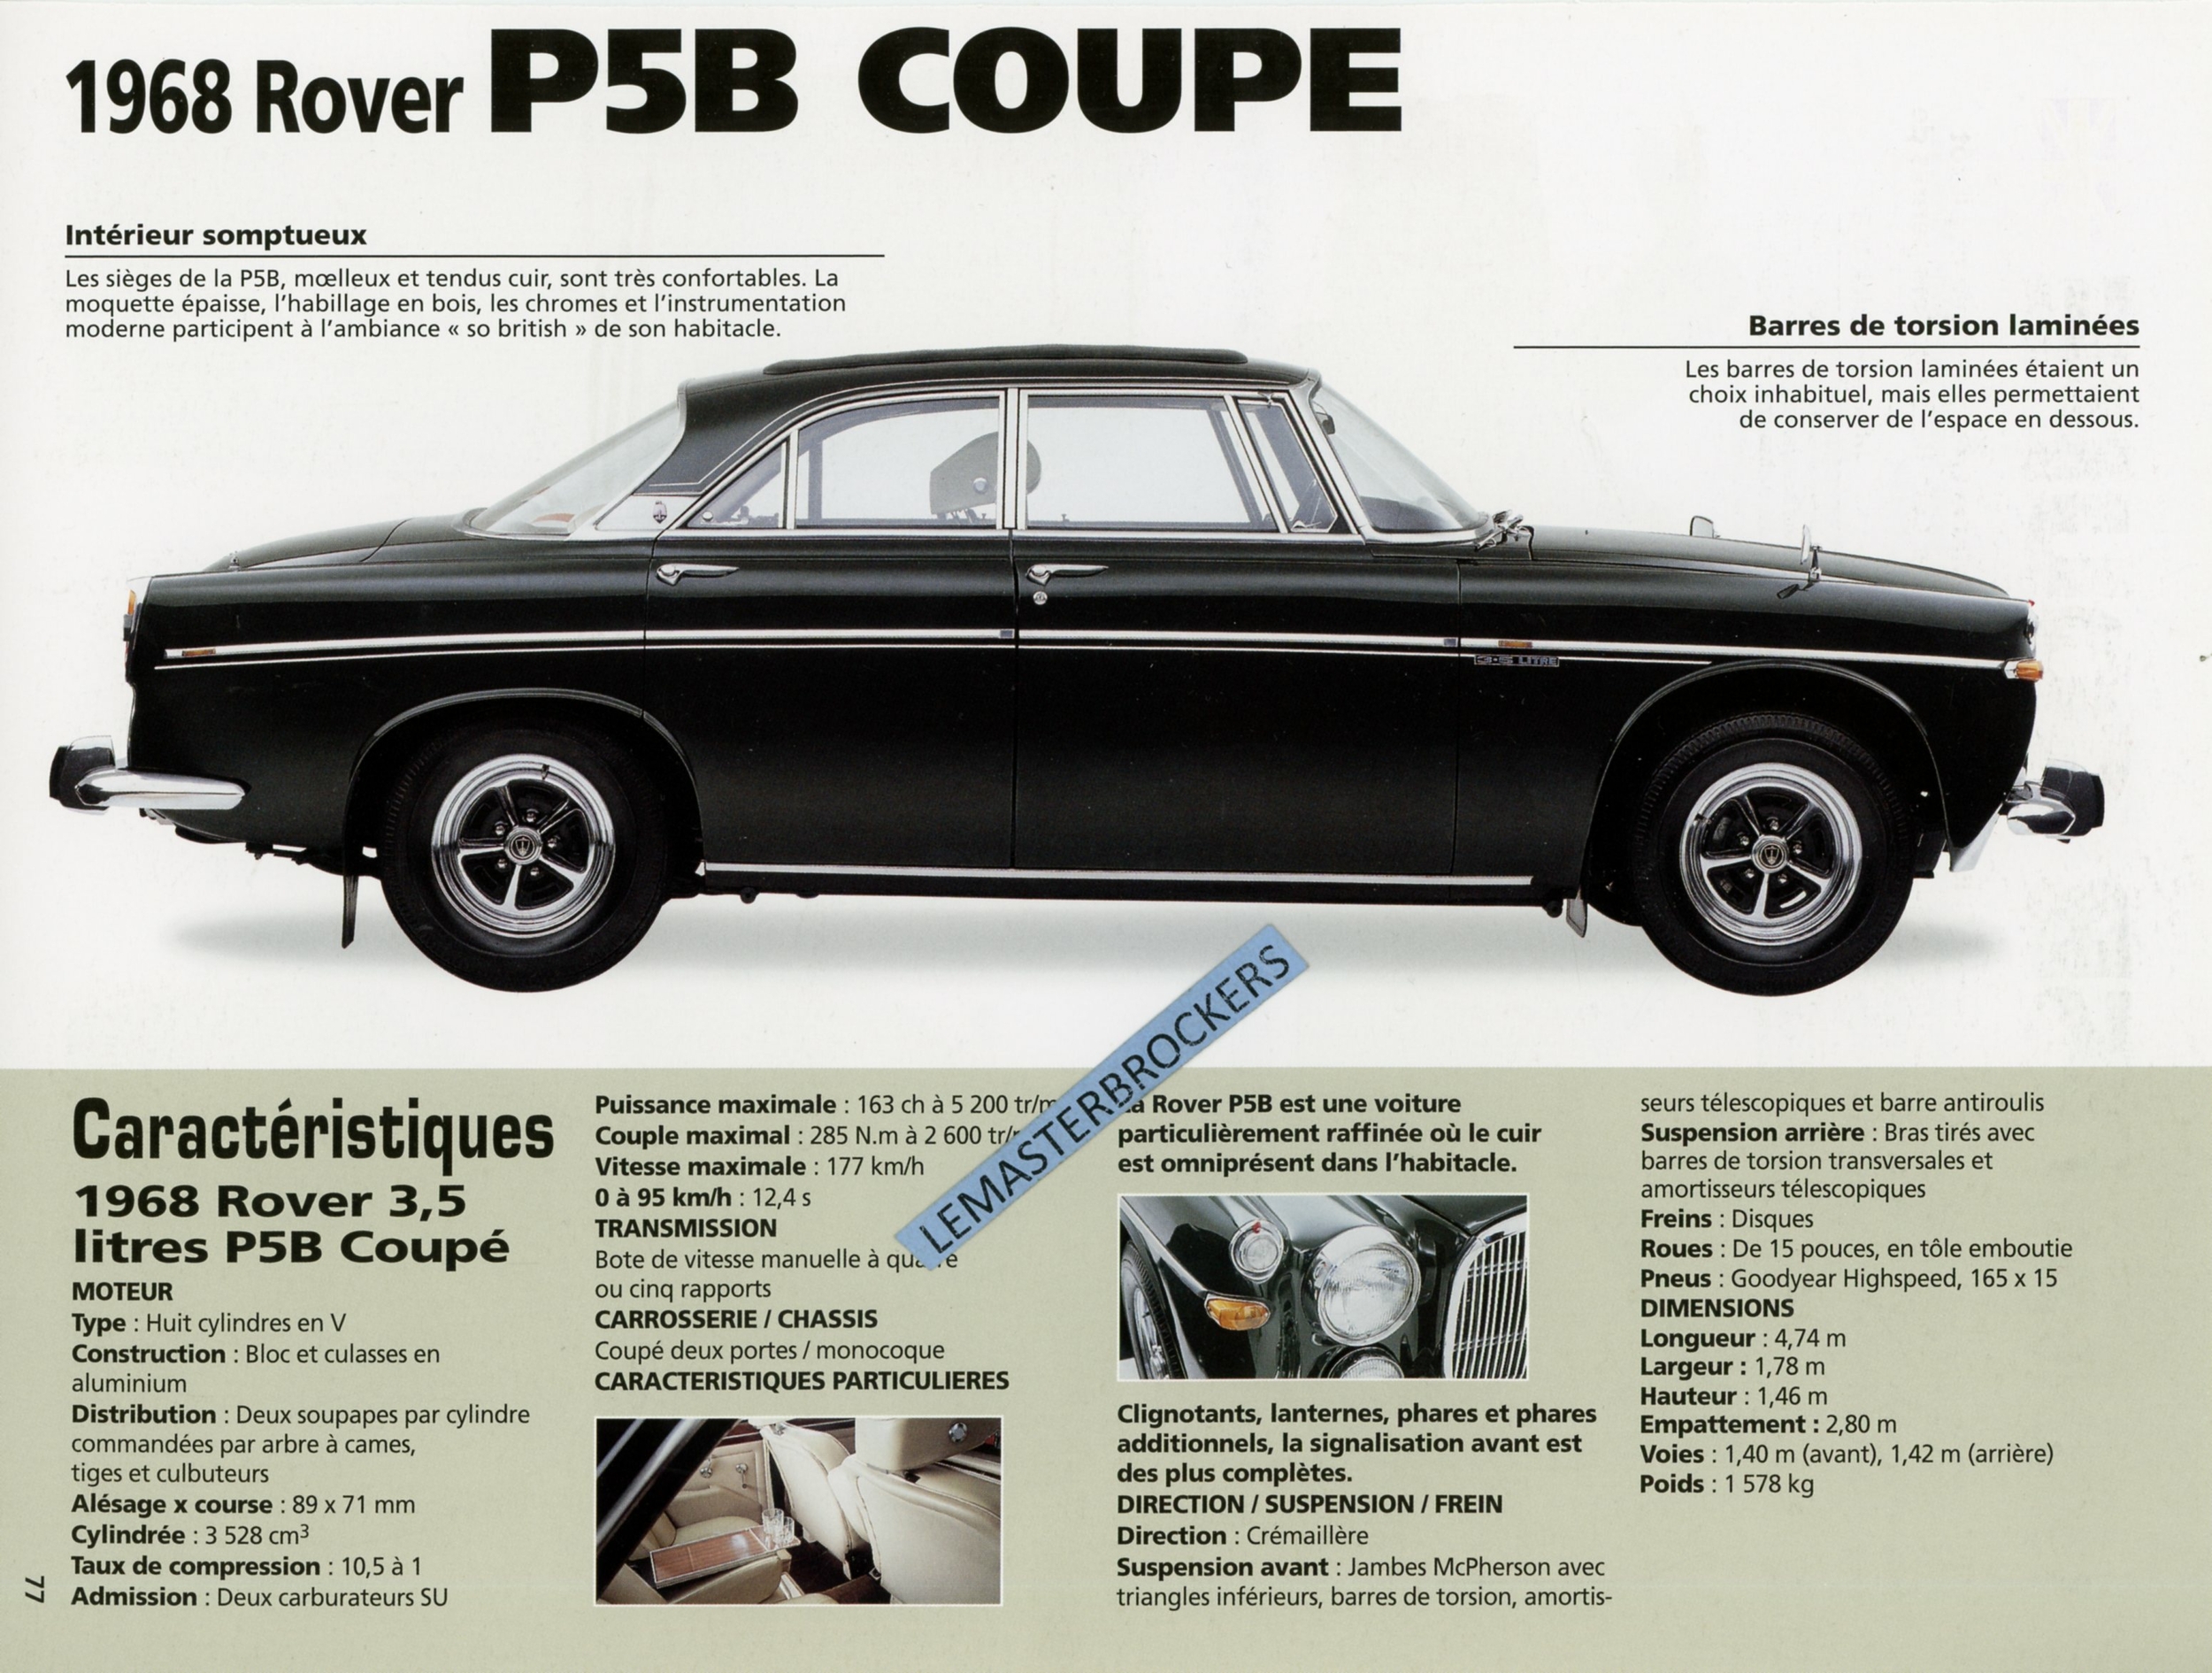 FICHE AUTO ROVER P5 1968 LEMASTERBROCKERS